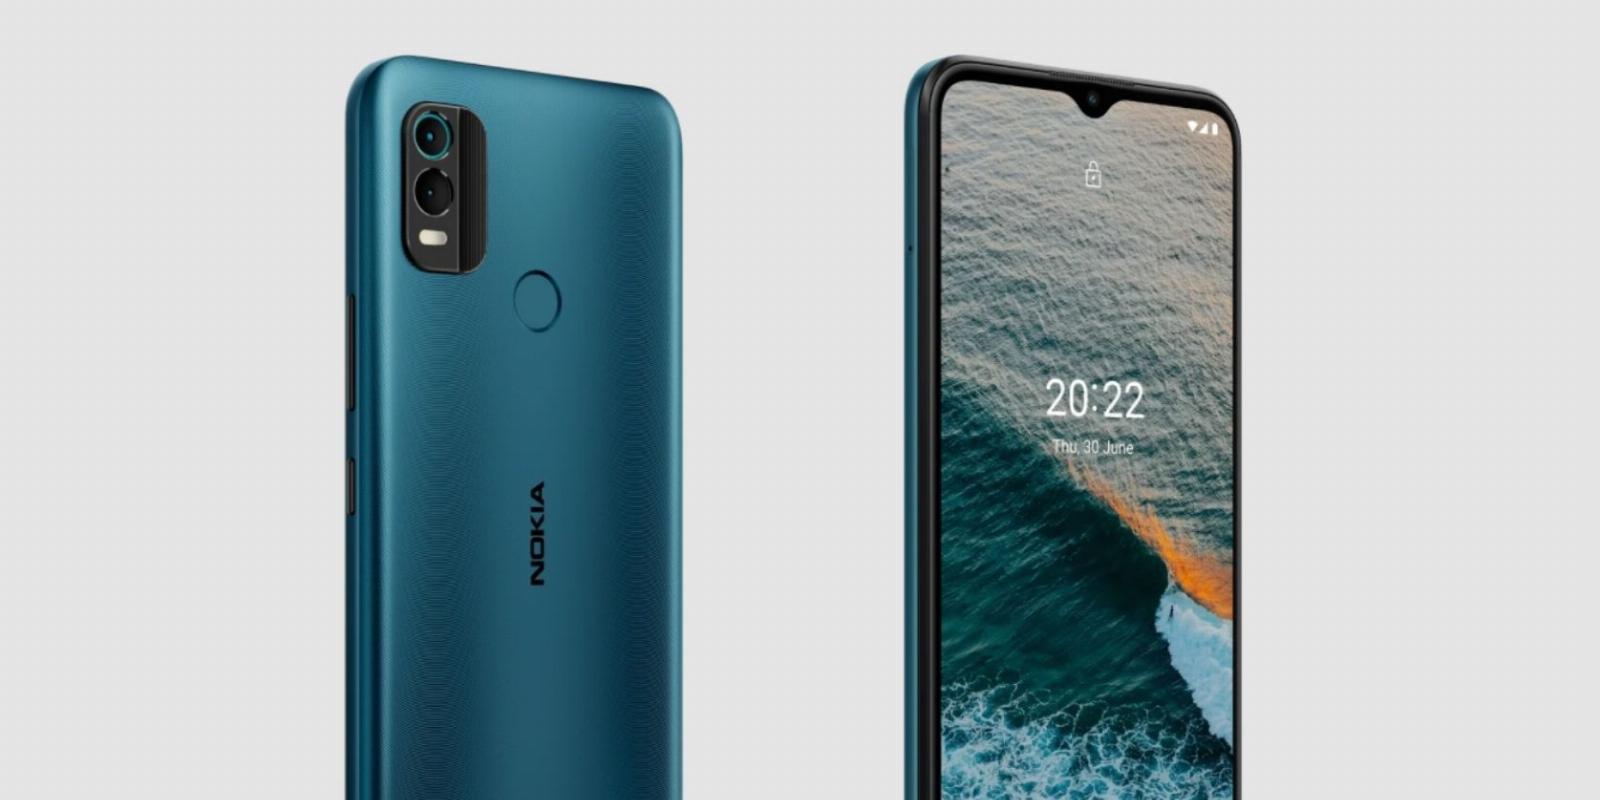 Nokia at MWC 2022: New Affordable Android Go Smartphones